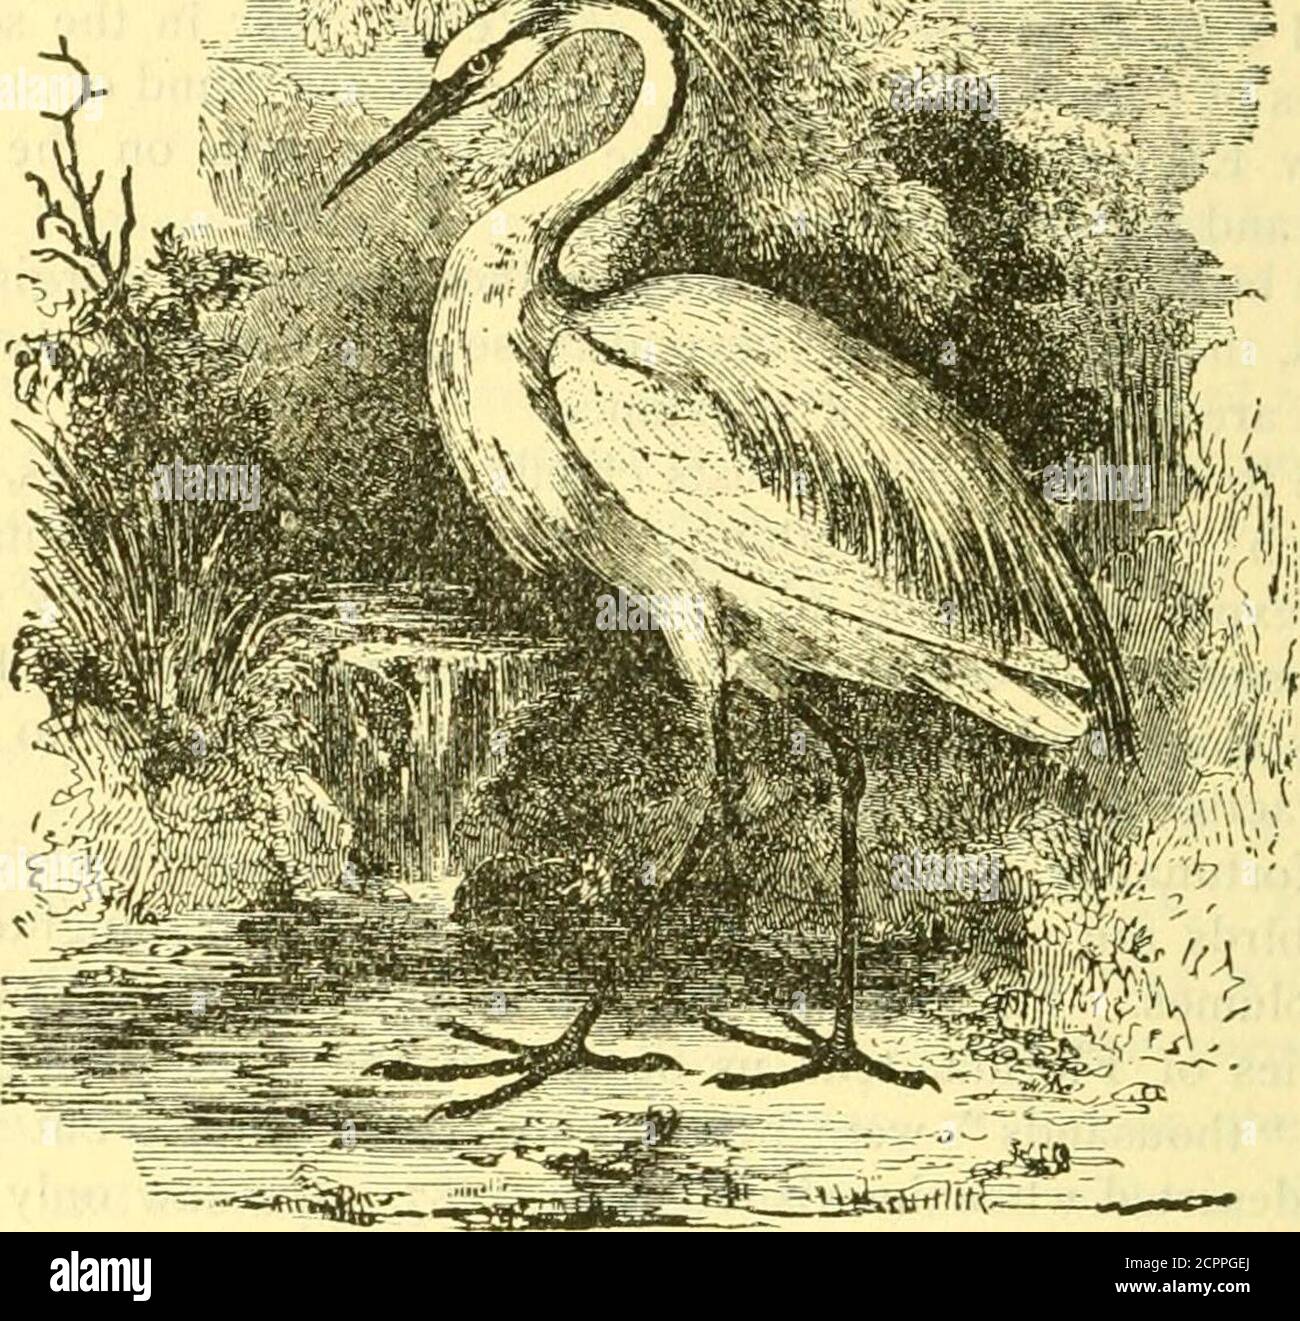 . A popular handbook of the birds of the United States and Canada . e. The birds are said to breed no farther north than Virginia andIllinois, though wandering beyond these latitudes after the youngbroods are independent of assistance. The food of this bird consists chiefly of small fish, frogs, lizards,and such ; but it refuses nothing eatable that comes within its reach,and is expert at catching mice and insects. Although shy when ina wild state, it is easily reconciled to captivity, says Dr. Brewer;and its elegant plumage and graceful carriage combine to make itan attractive ornament to cou Stock Photo